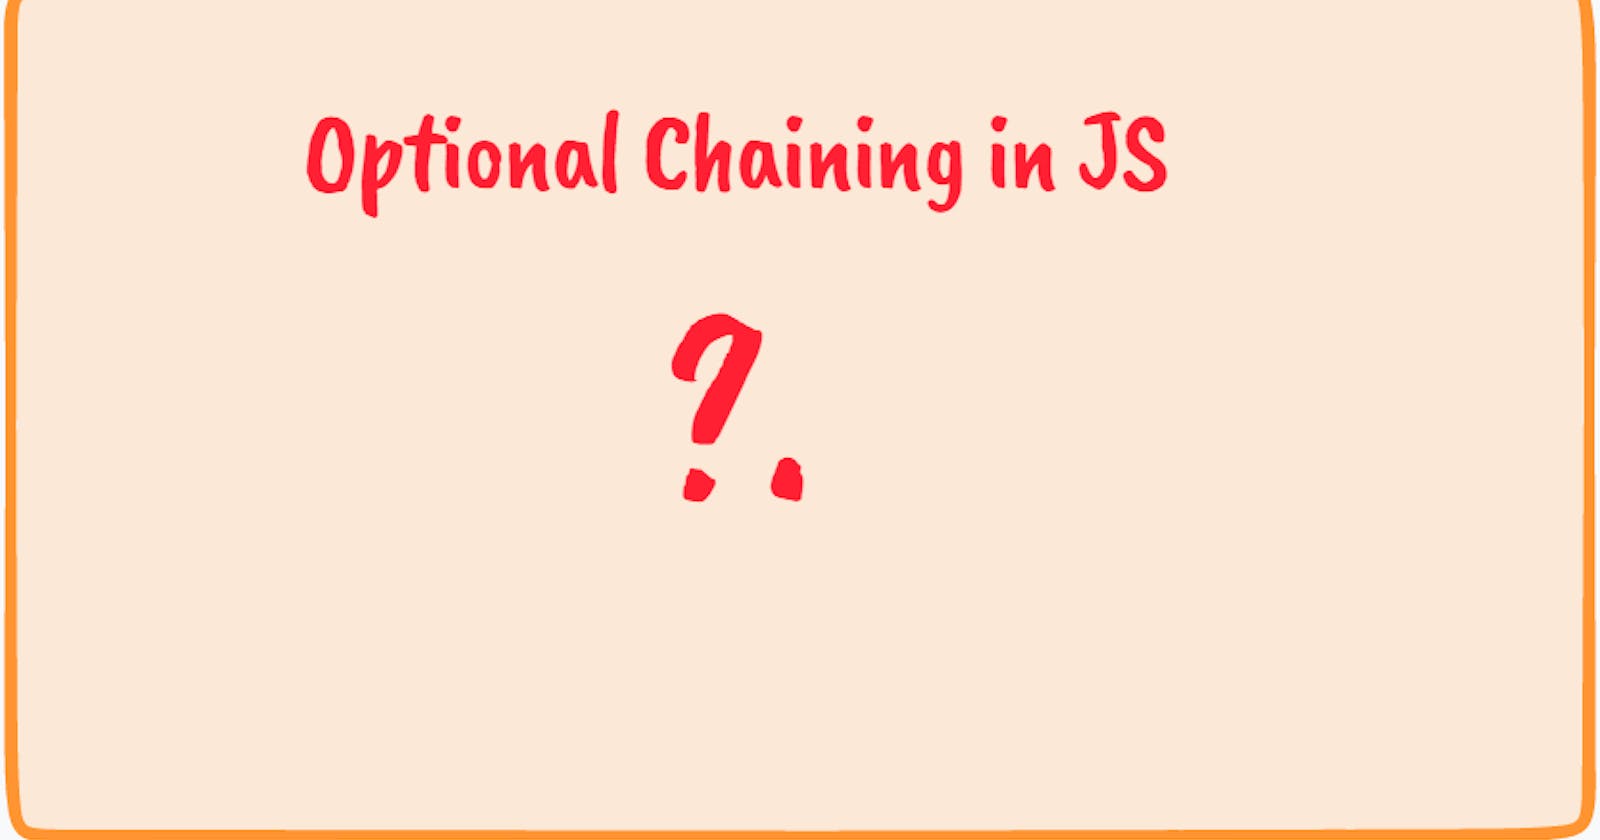 Optional Chaining in JS